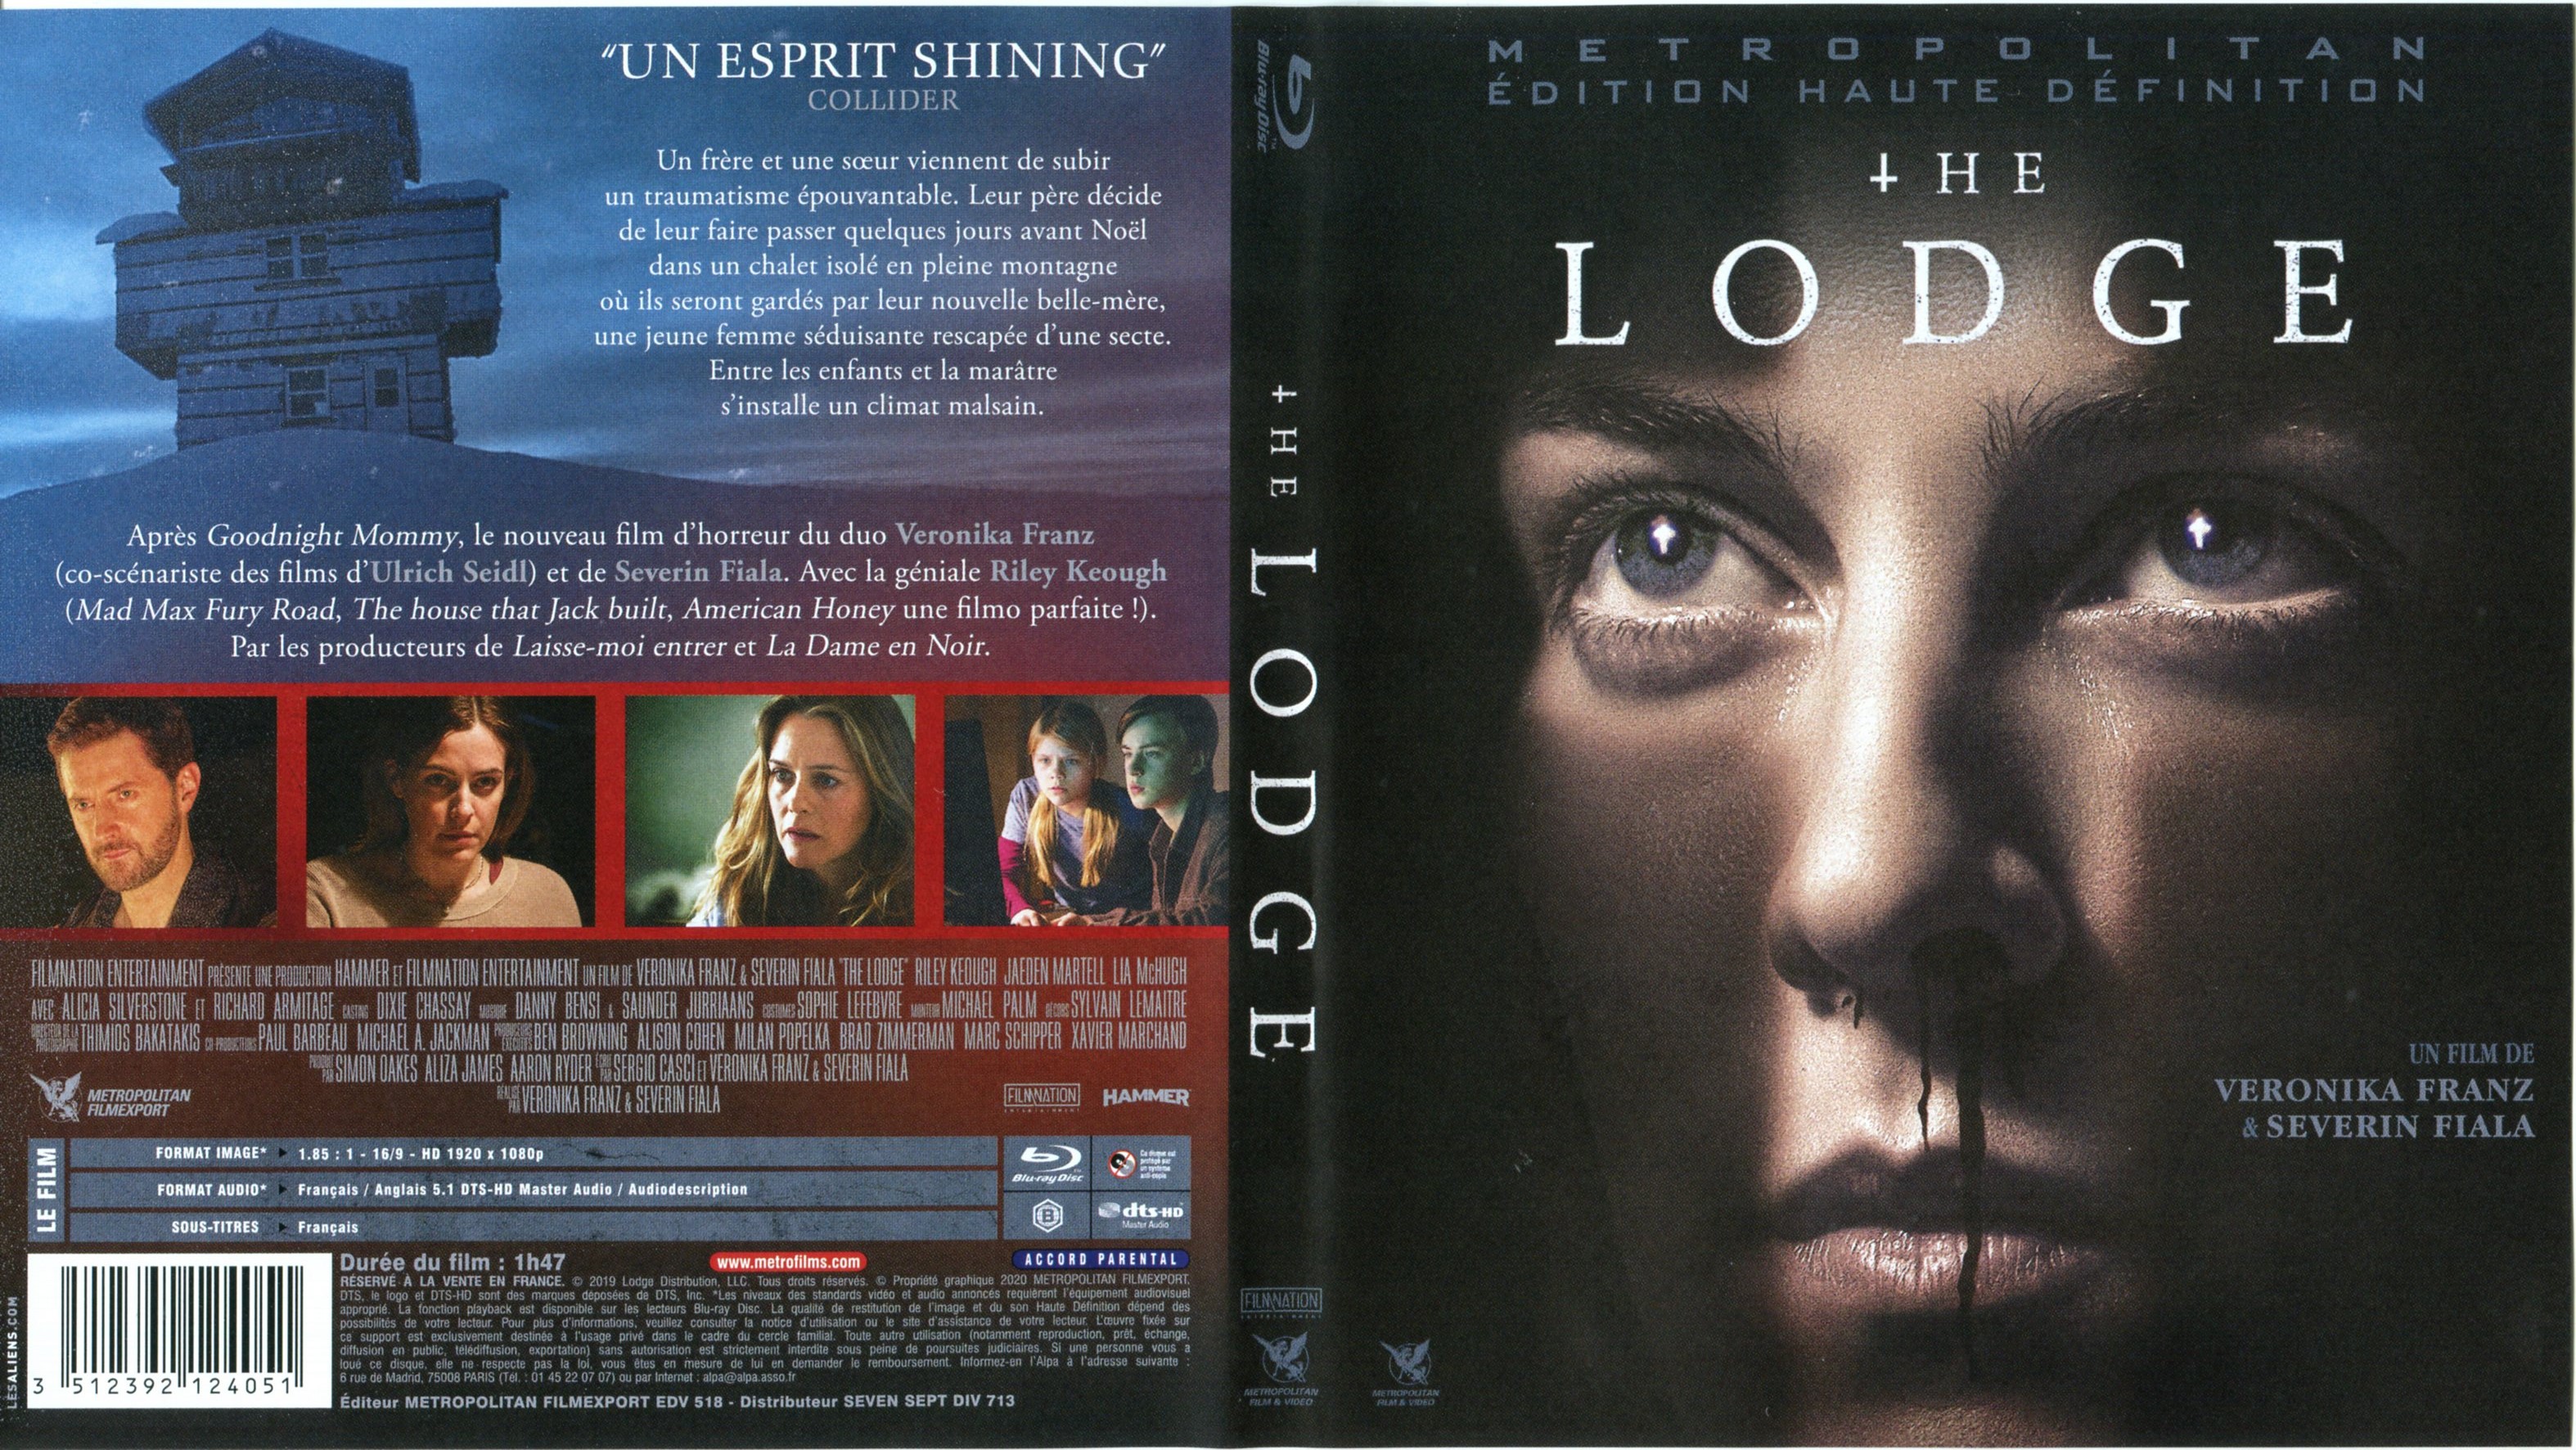 Jaquette DVD The lodge (BLU-RAY)